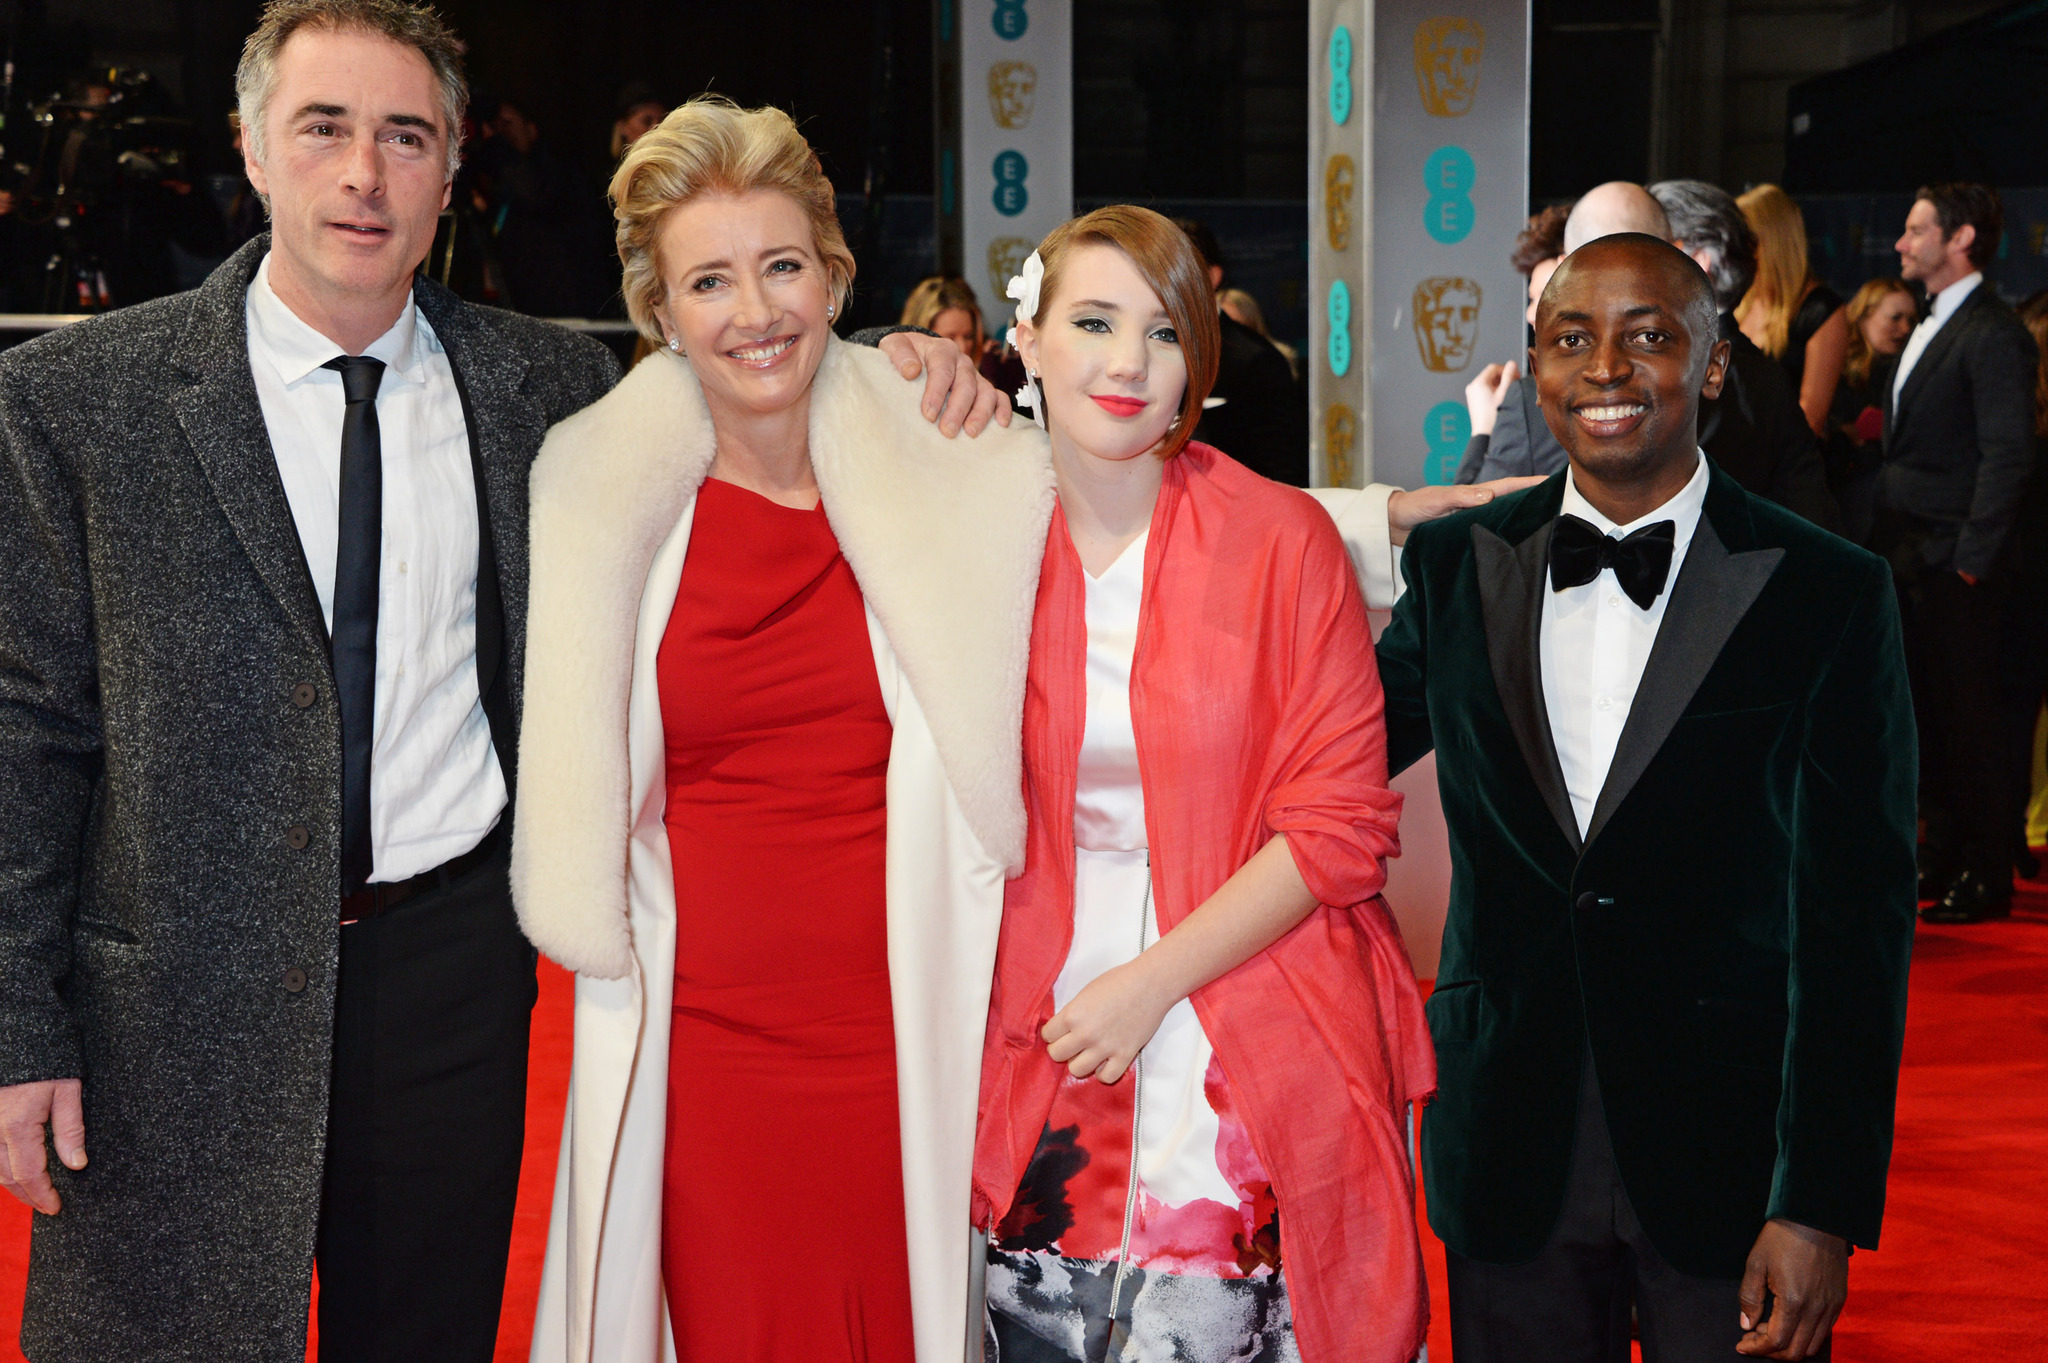 Greg Wise, Emma Thompson, Gaia Wise and Tindyebwa Agaba Wise attend the EE British Academy Film Awards 2014 at The Royal Opera House on February 16, 2014 in London, England.